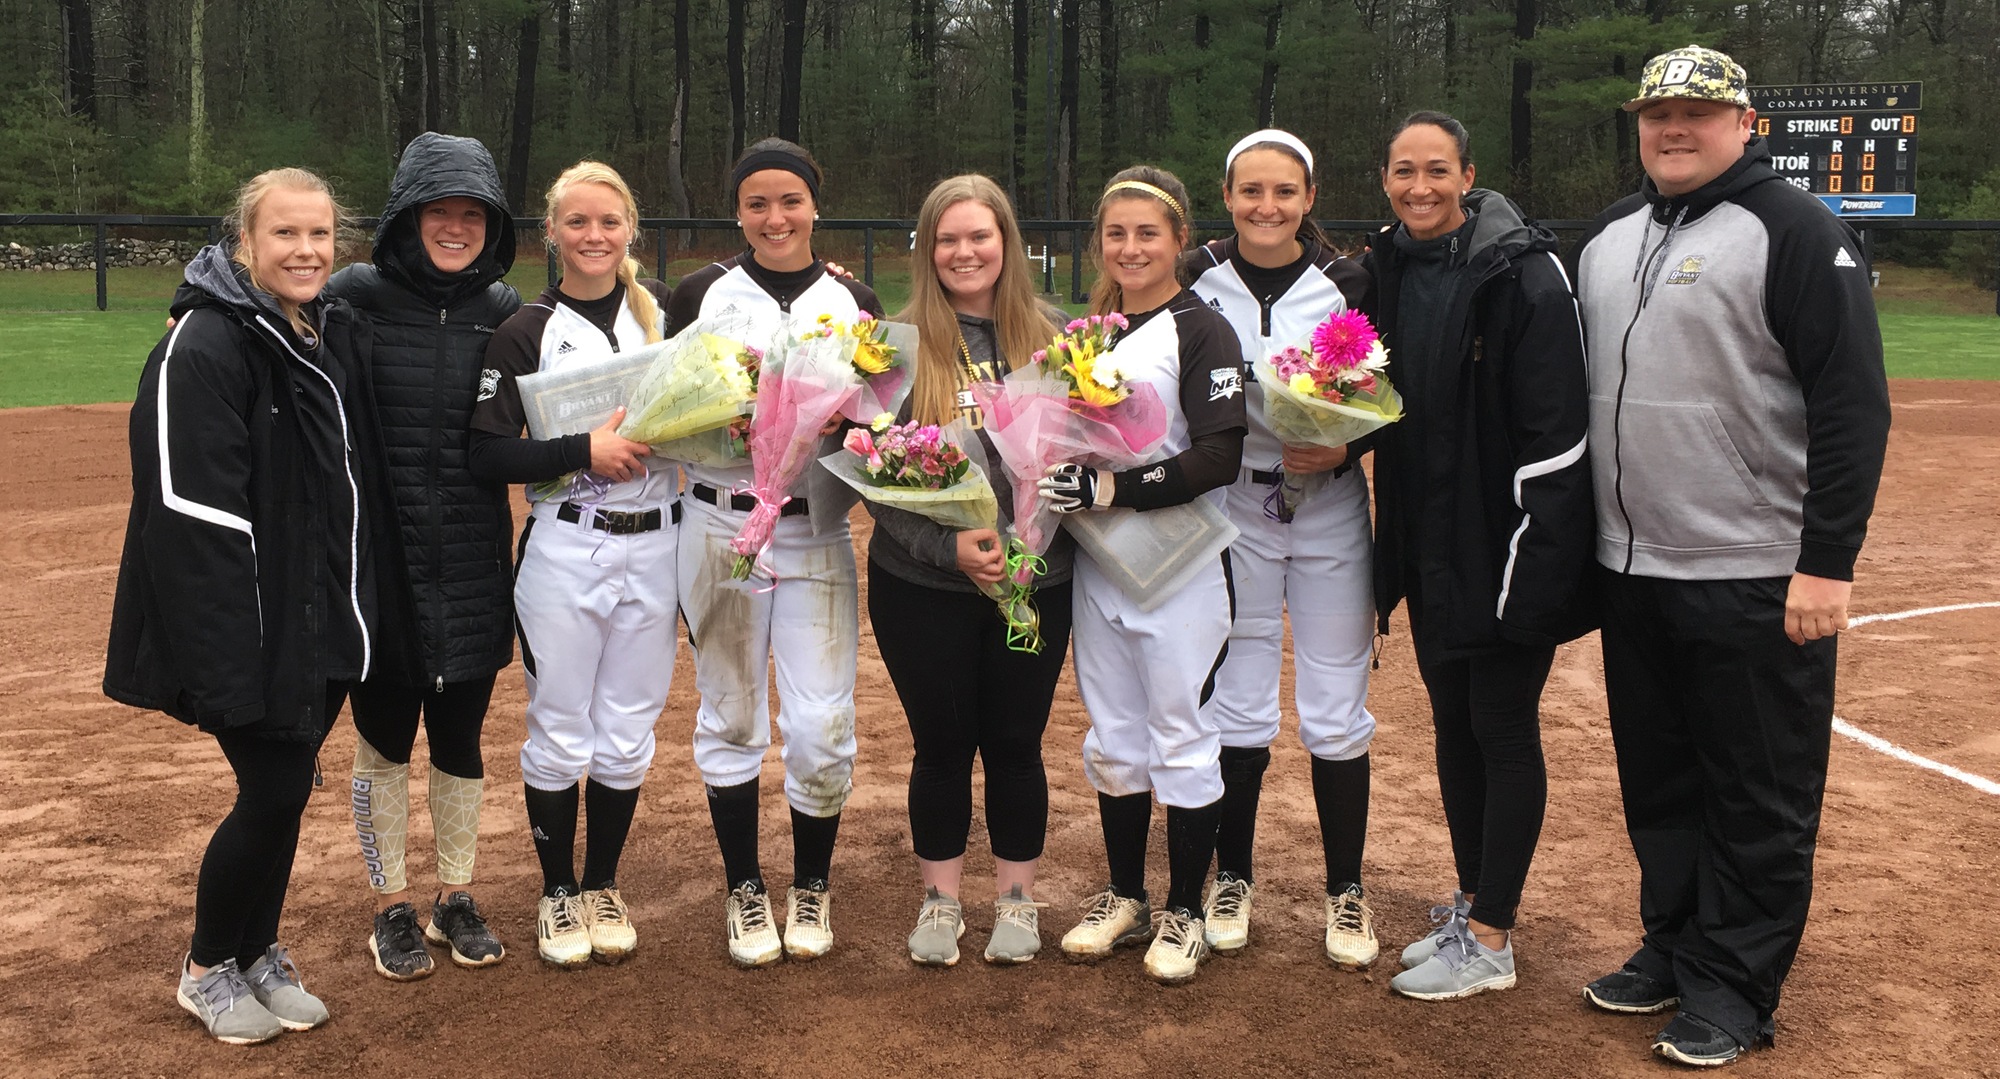 Bulldogs drop both to Red Flash on Senior Day in Smithfield